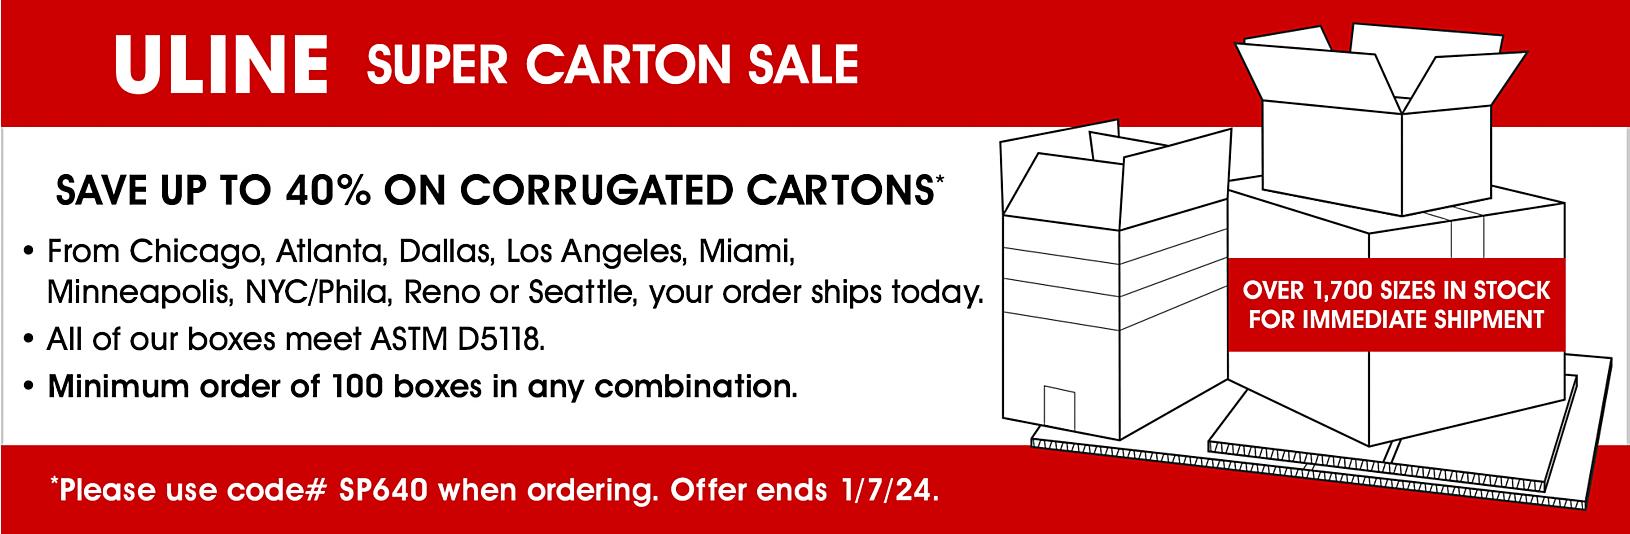 Super Carton Sale - Save up to 40% on Corrugated Cartons. Please use code# SP640 when ordering. Offer ends 1/7/24.